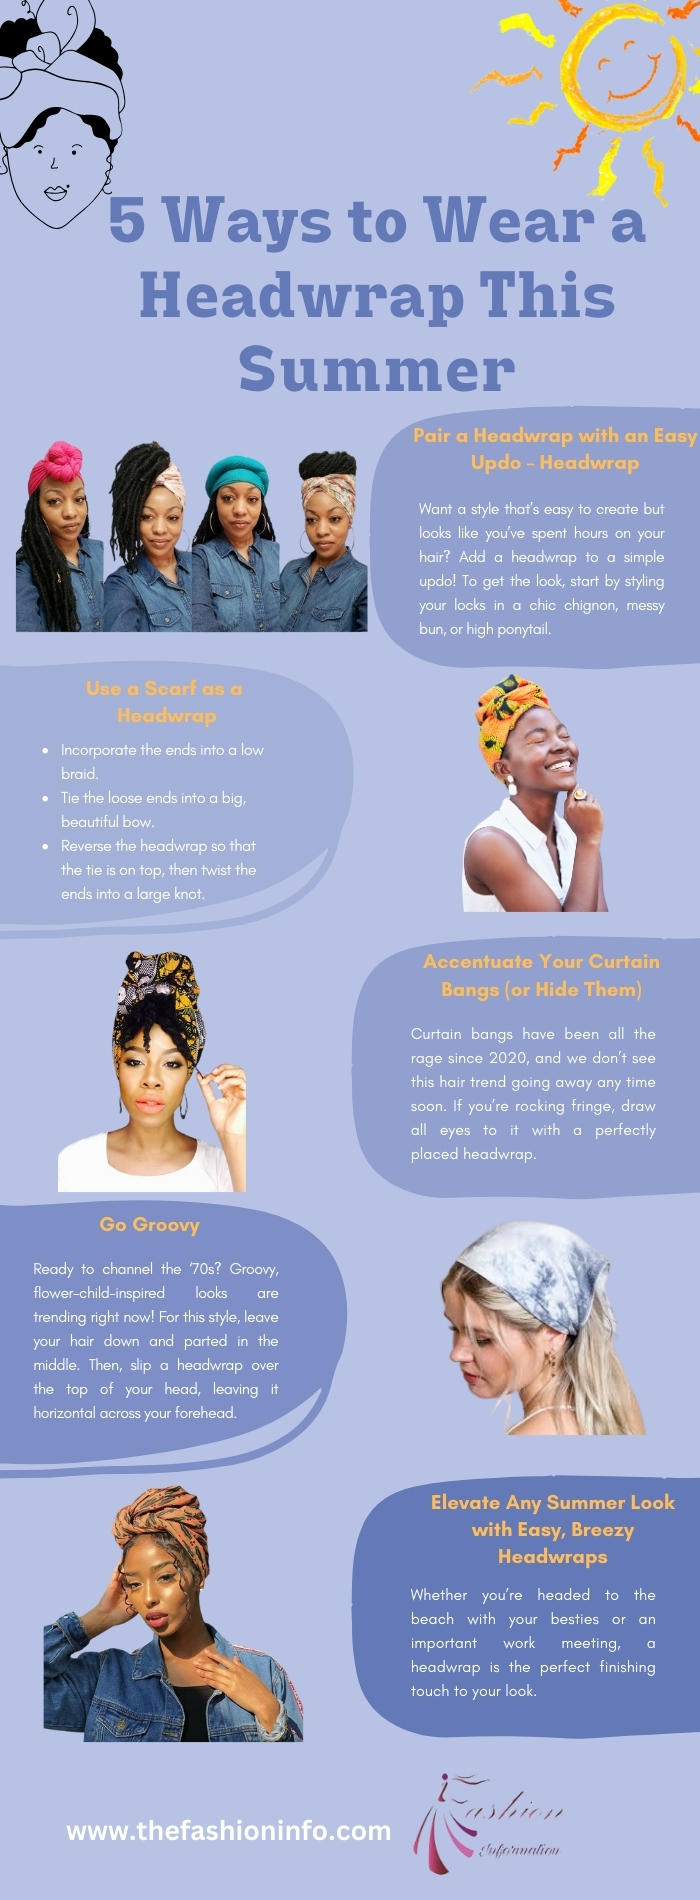 5 Ways to Wear a Headwrap This Summer